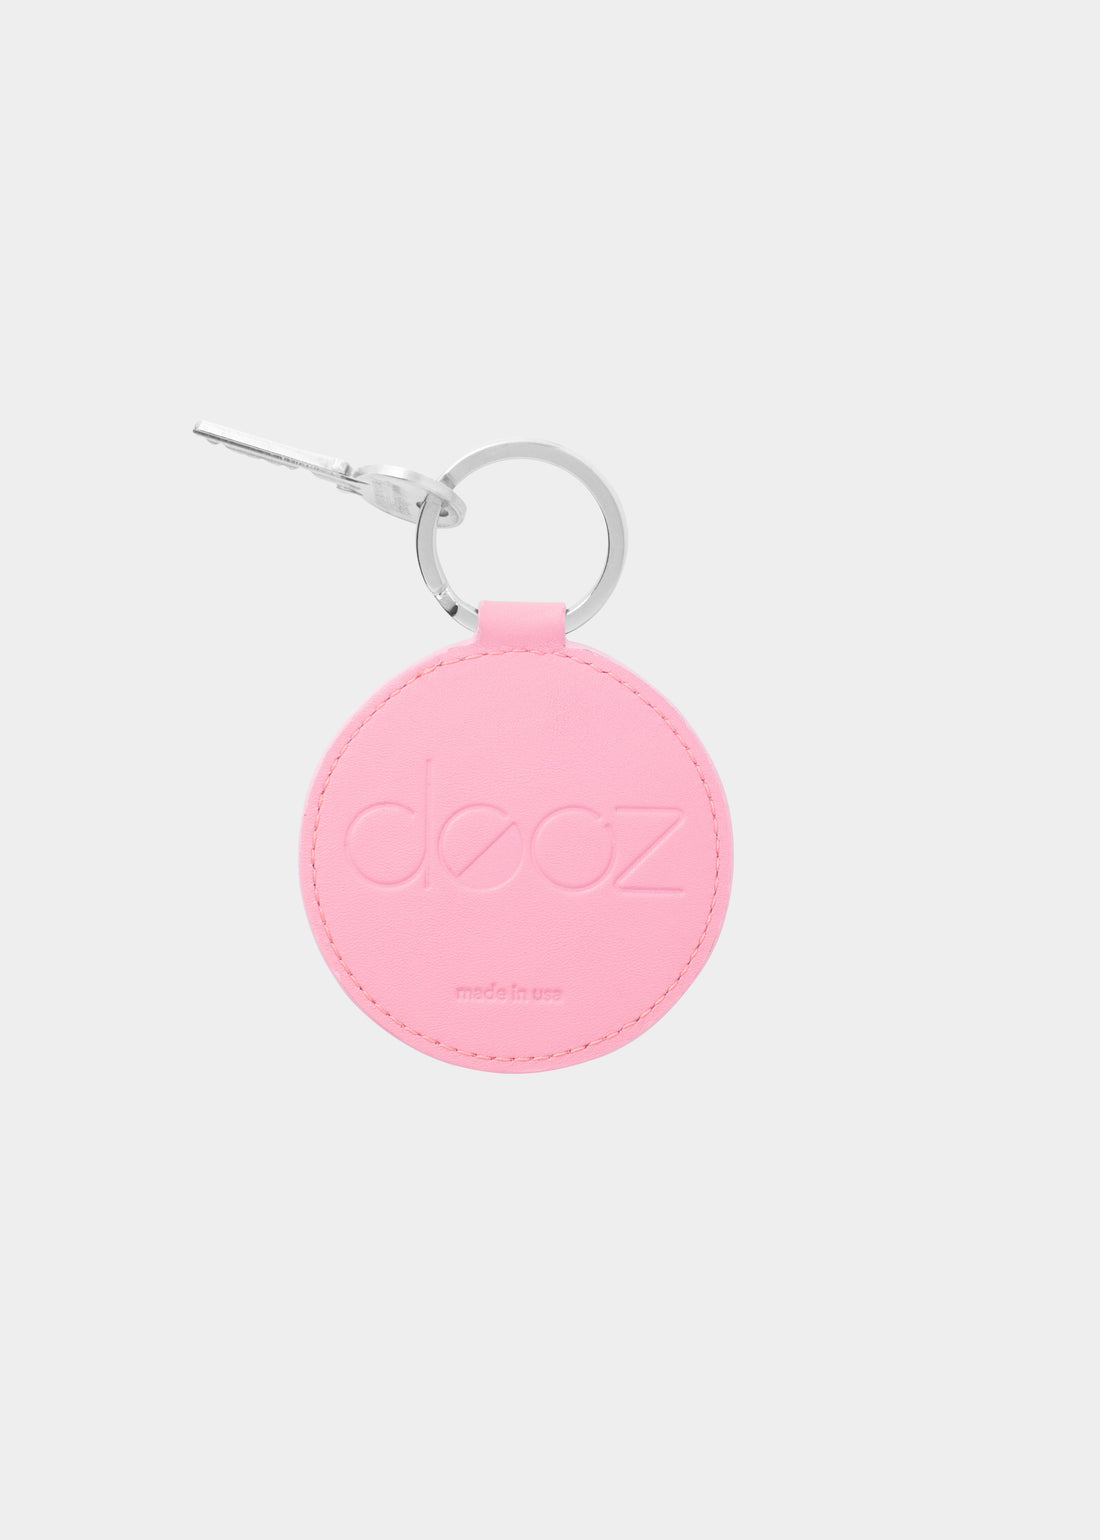 Dooz Libra blush pink leather keychain with embossed logo and silver keyring